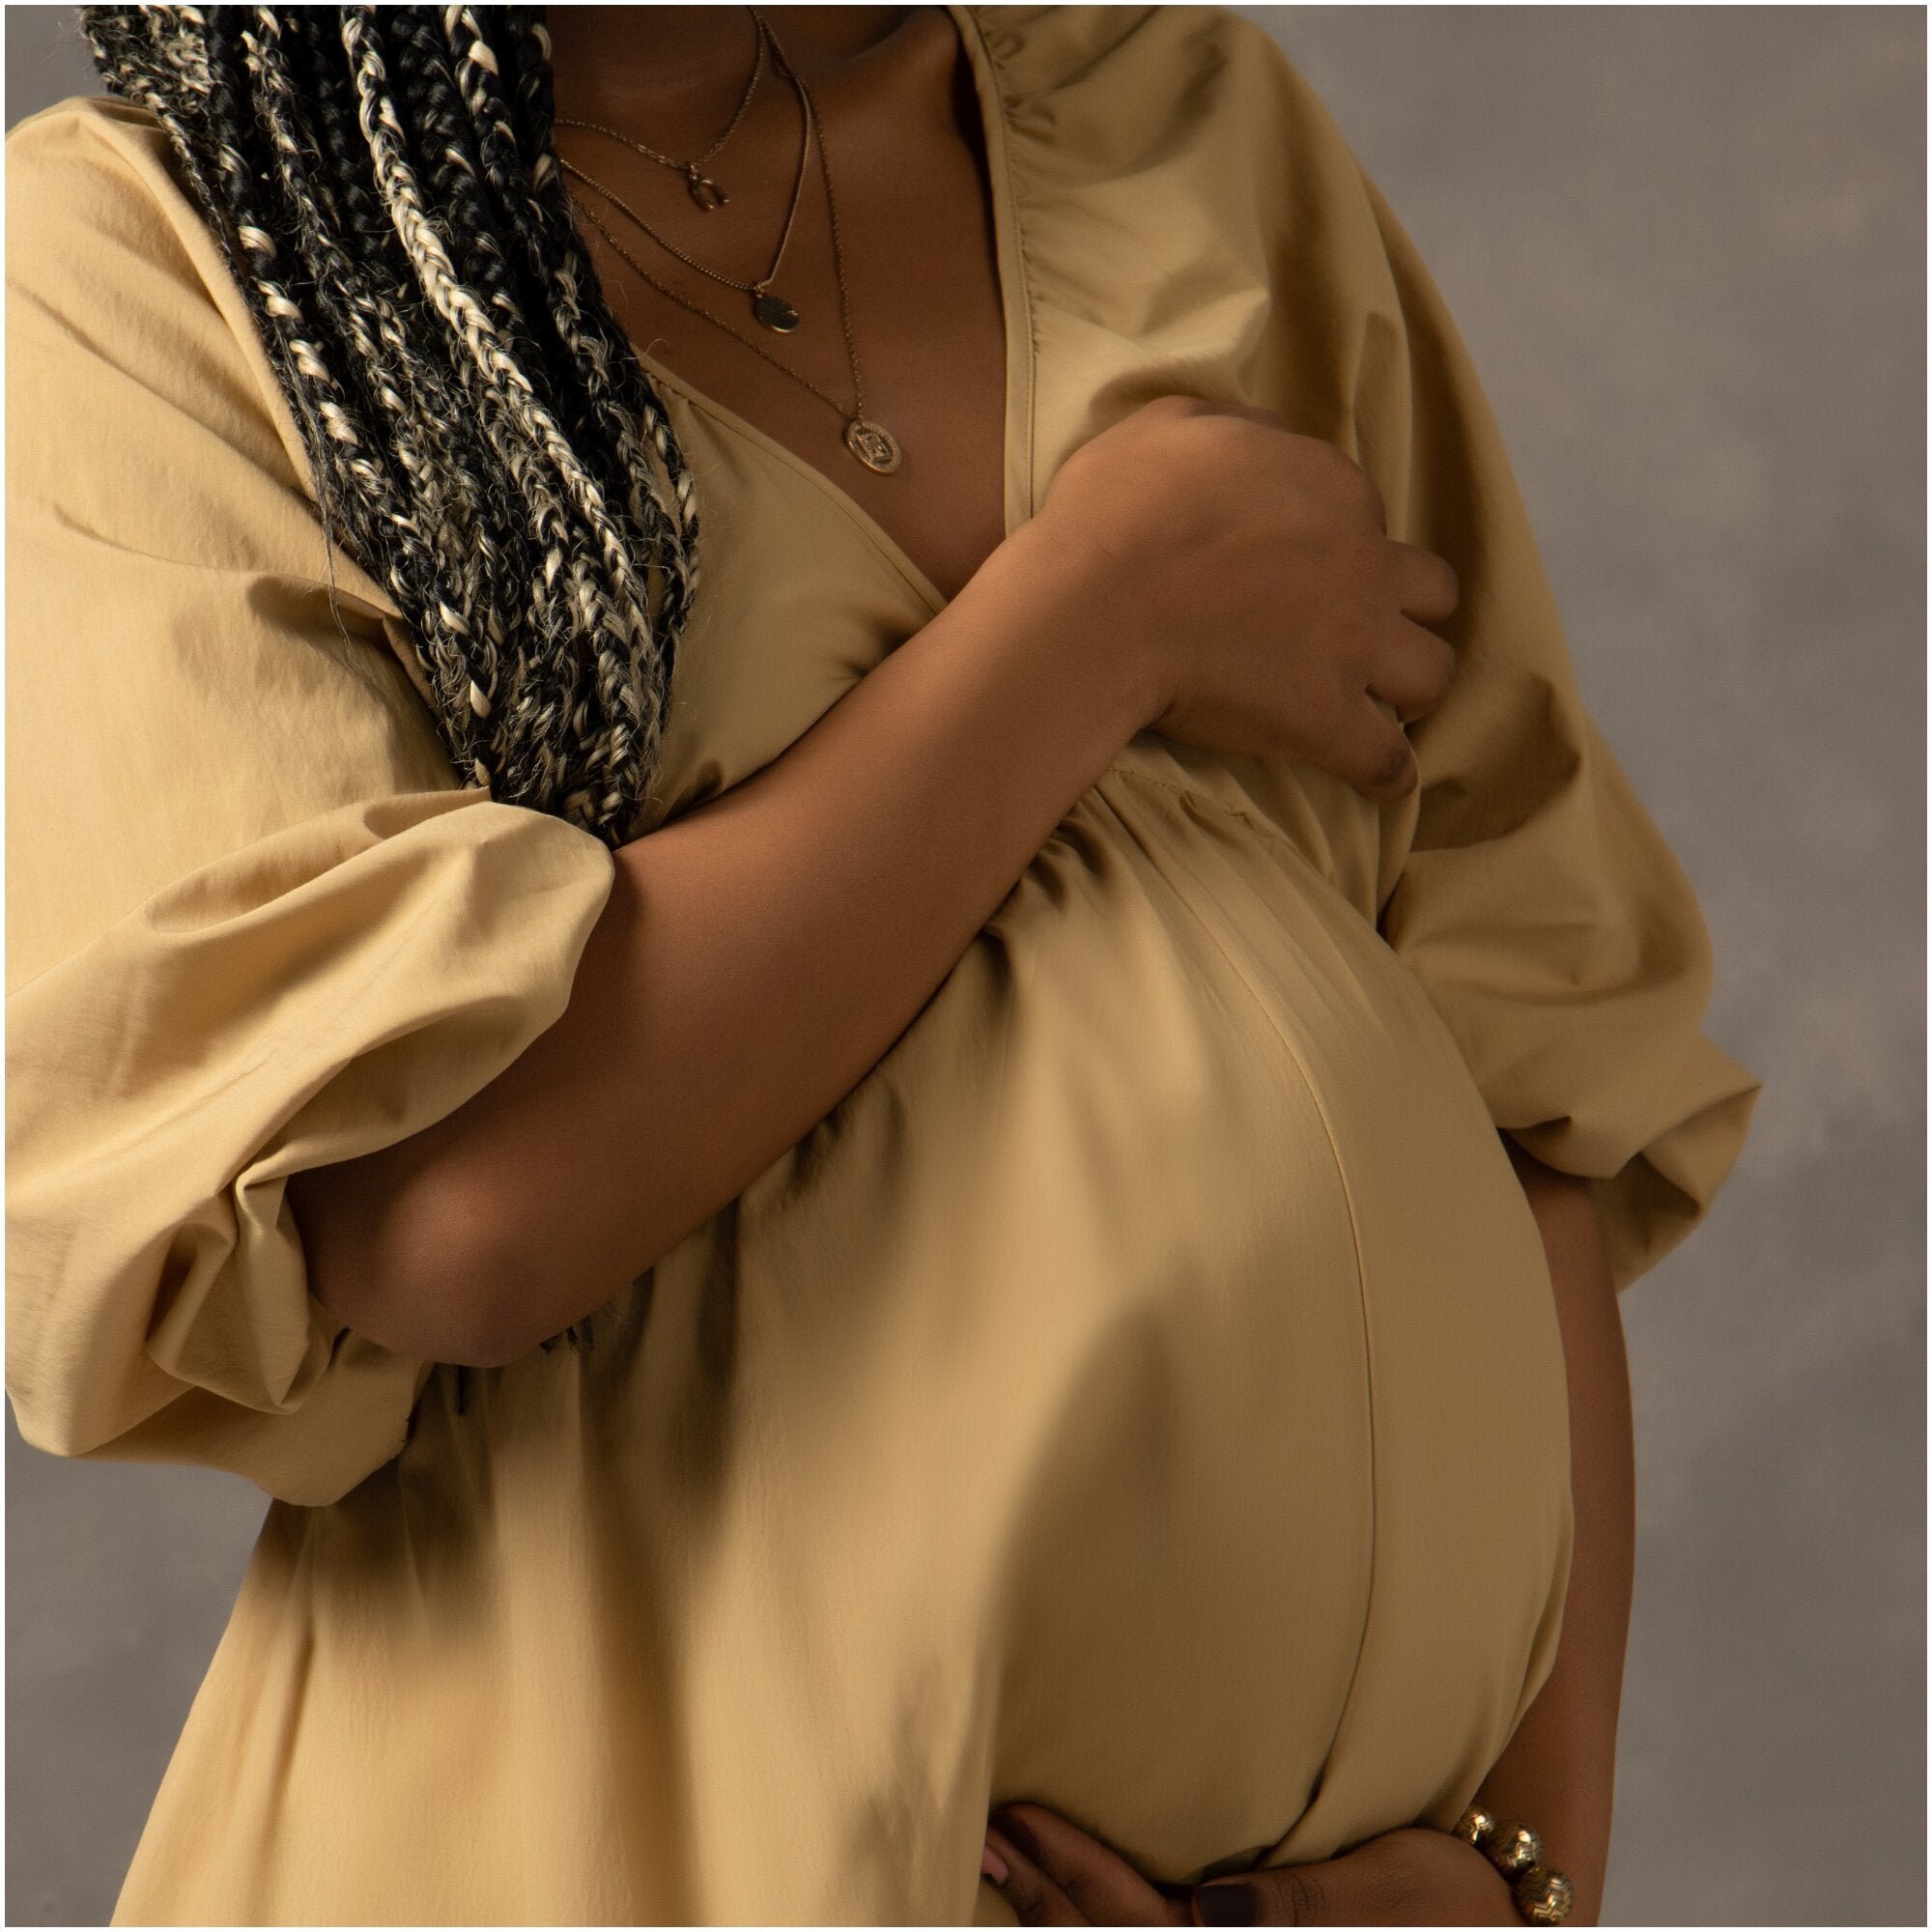 Rasta haired pregnant woman is holding her stomach wearing a cushy, beige dress.